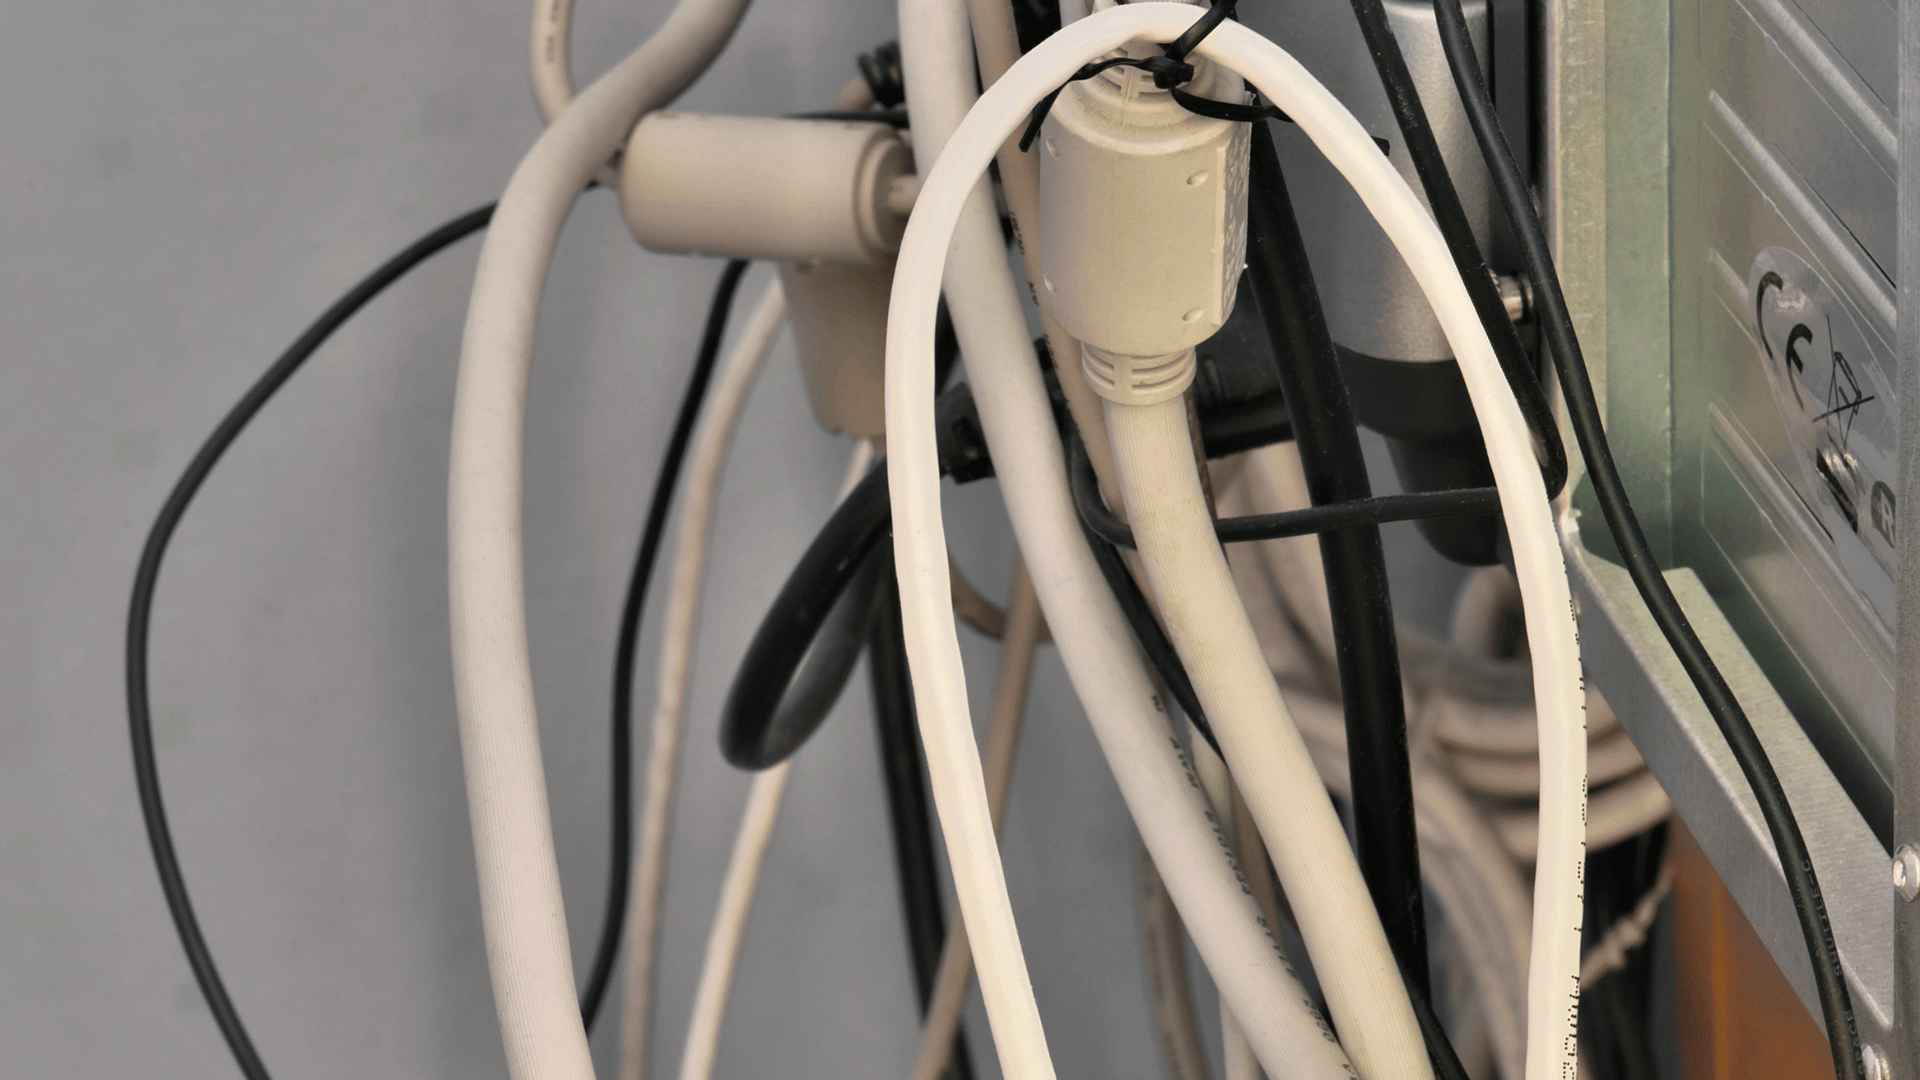 https://www.vistaresidences.com.ph/assets/_cable-wire-organizing-tips-_condo-investing_11zon.jpg